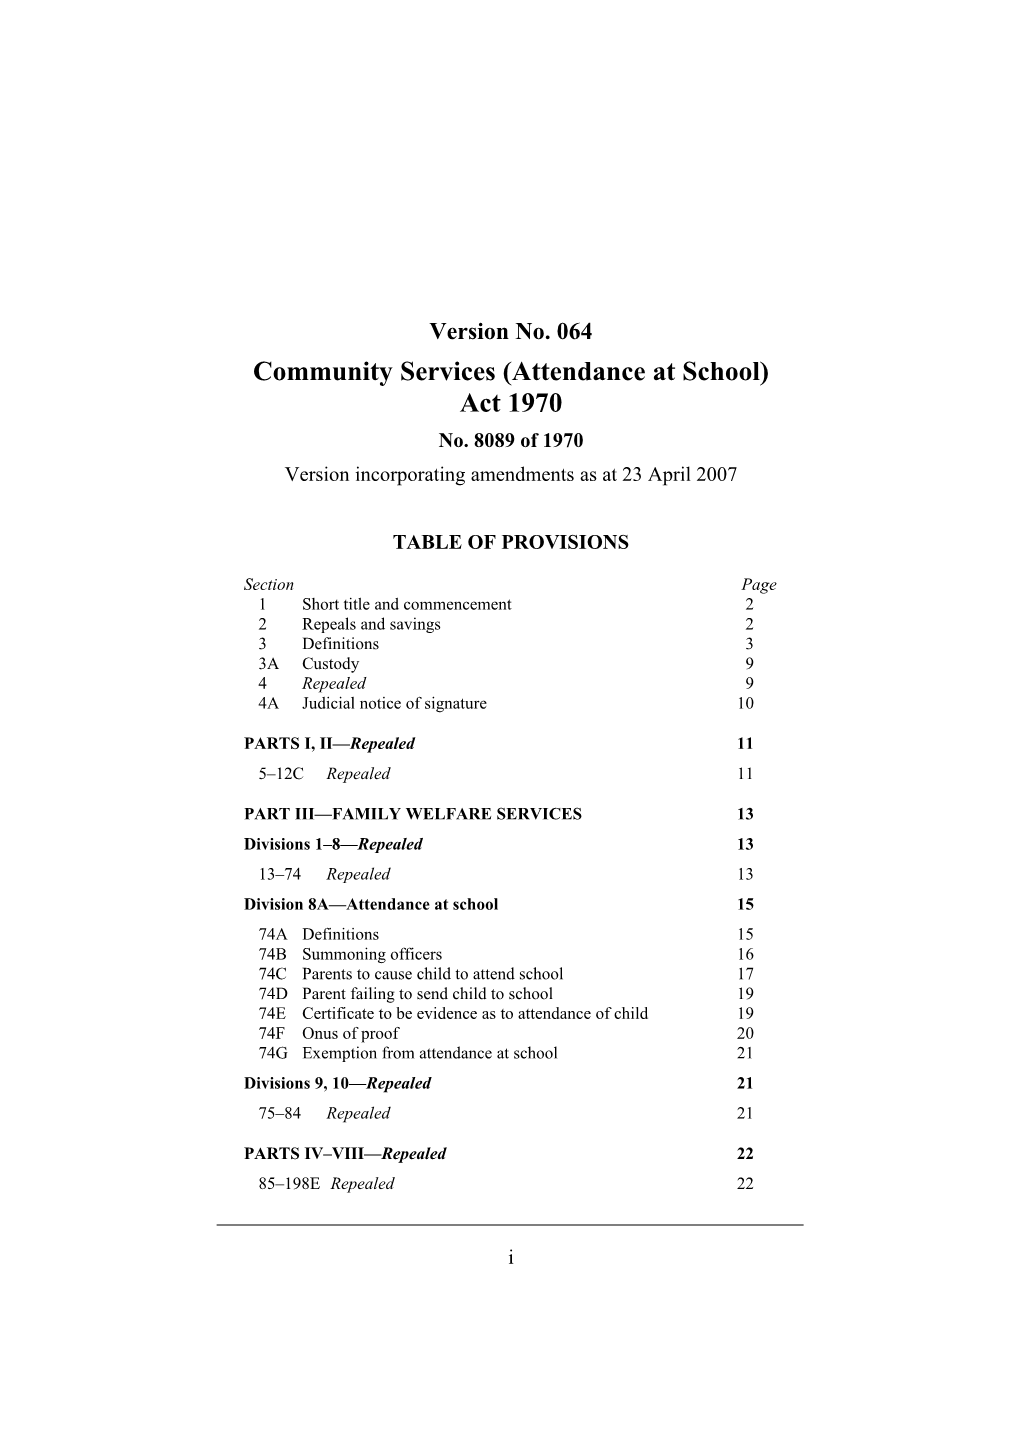 Community Services (Attendance at School) Act 1970